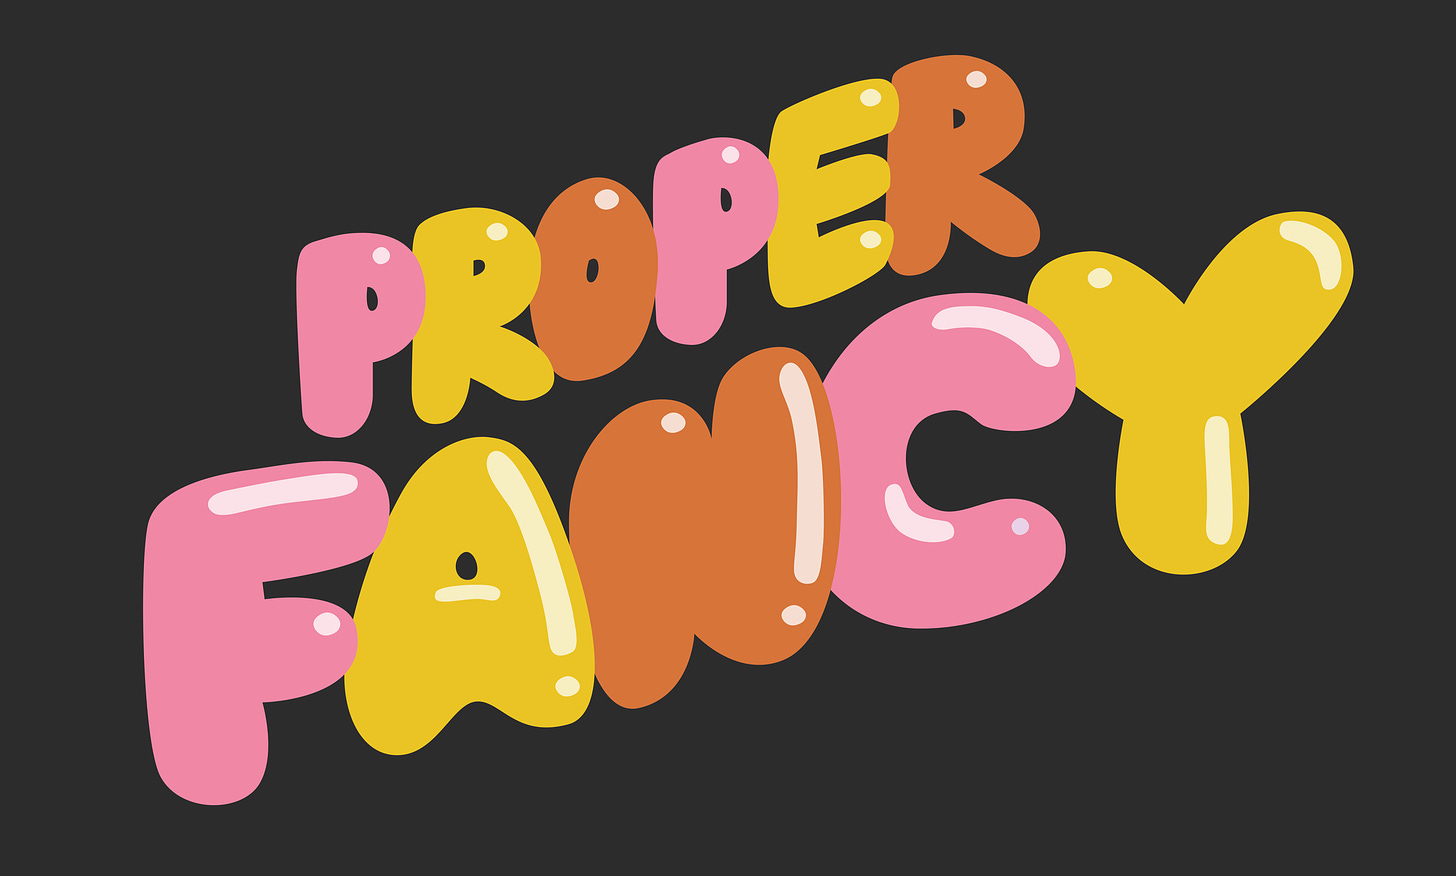 The image is a logo for Proper Fancy. It has a black background and the words Proper Fancy are written in a balloon like font. The letters are pink, yellow and orange. 